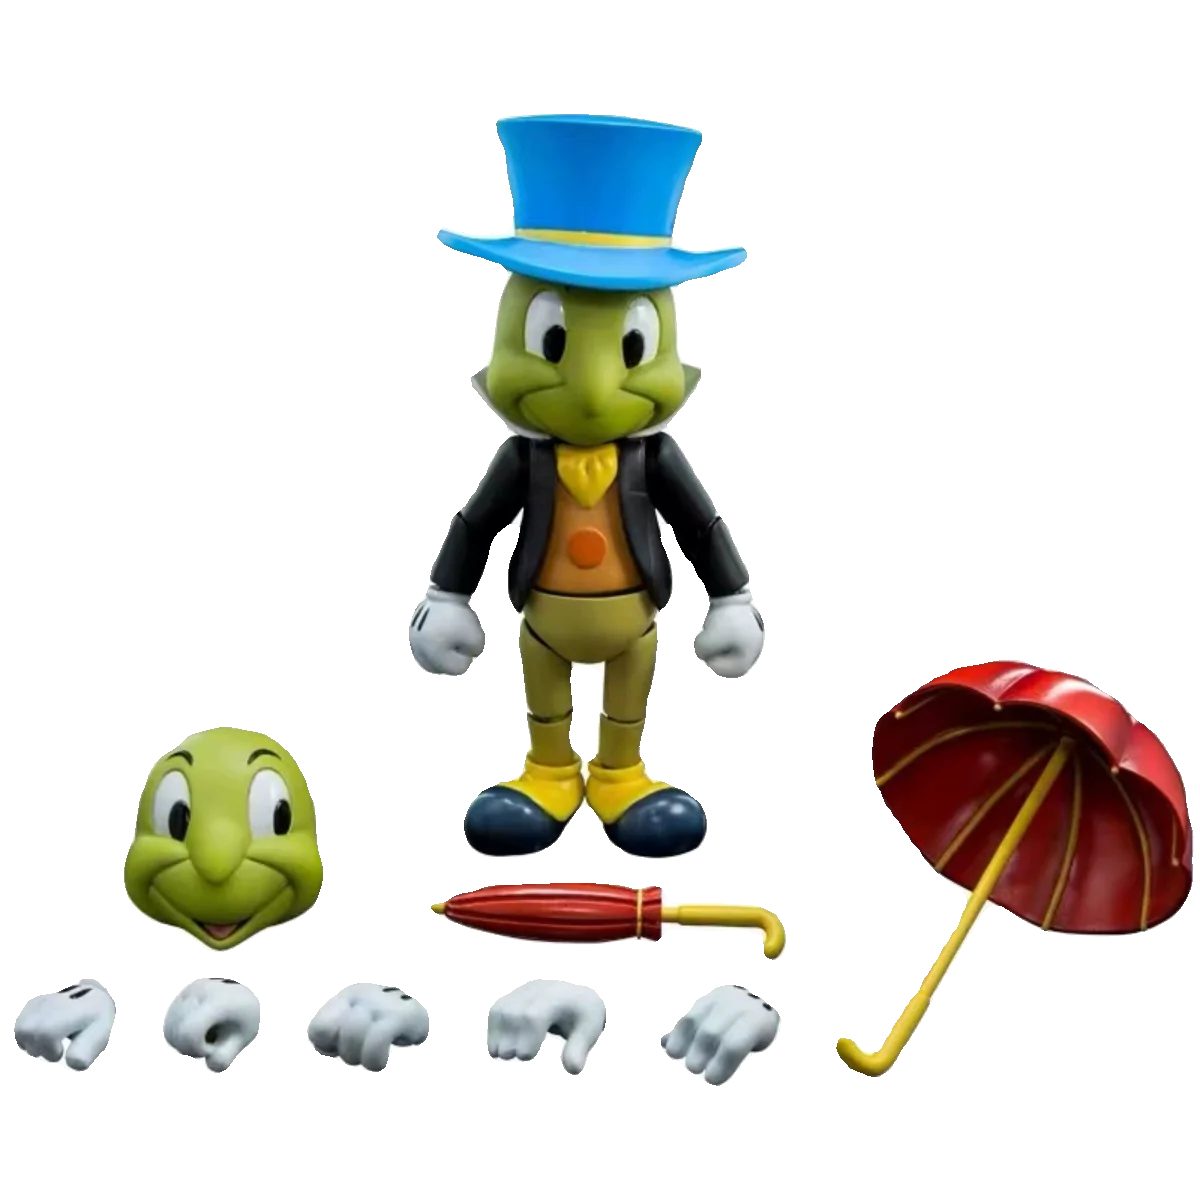 Pinocchio Lizard Scale Model Toy by Japanese Bandai